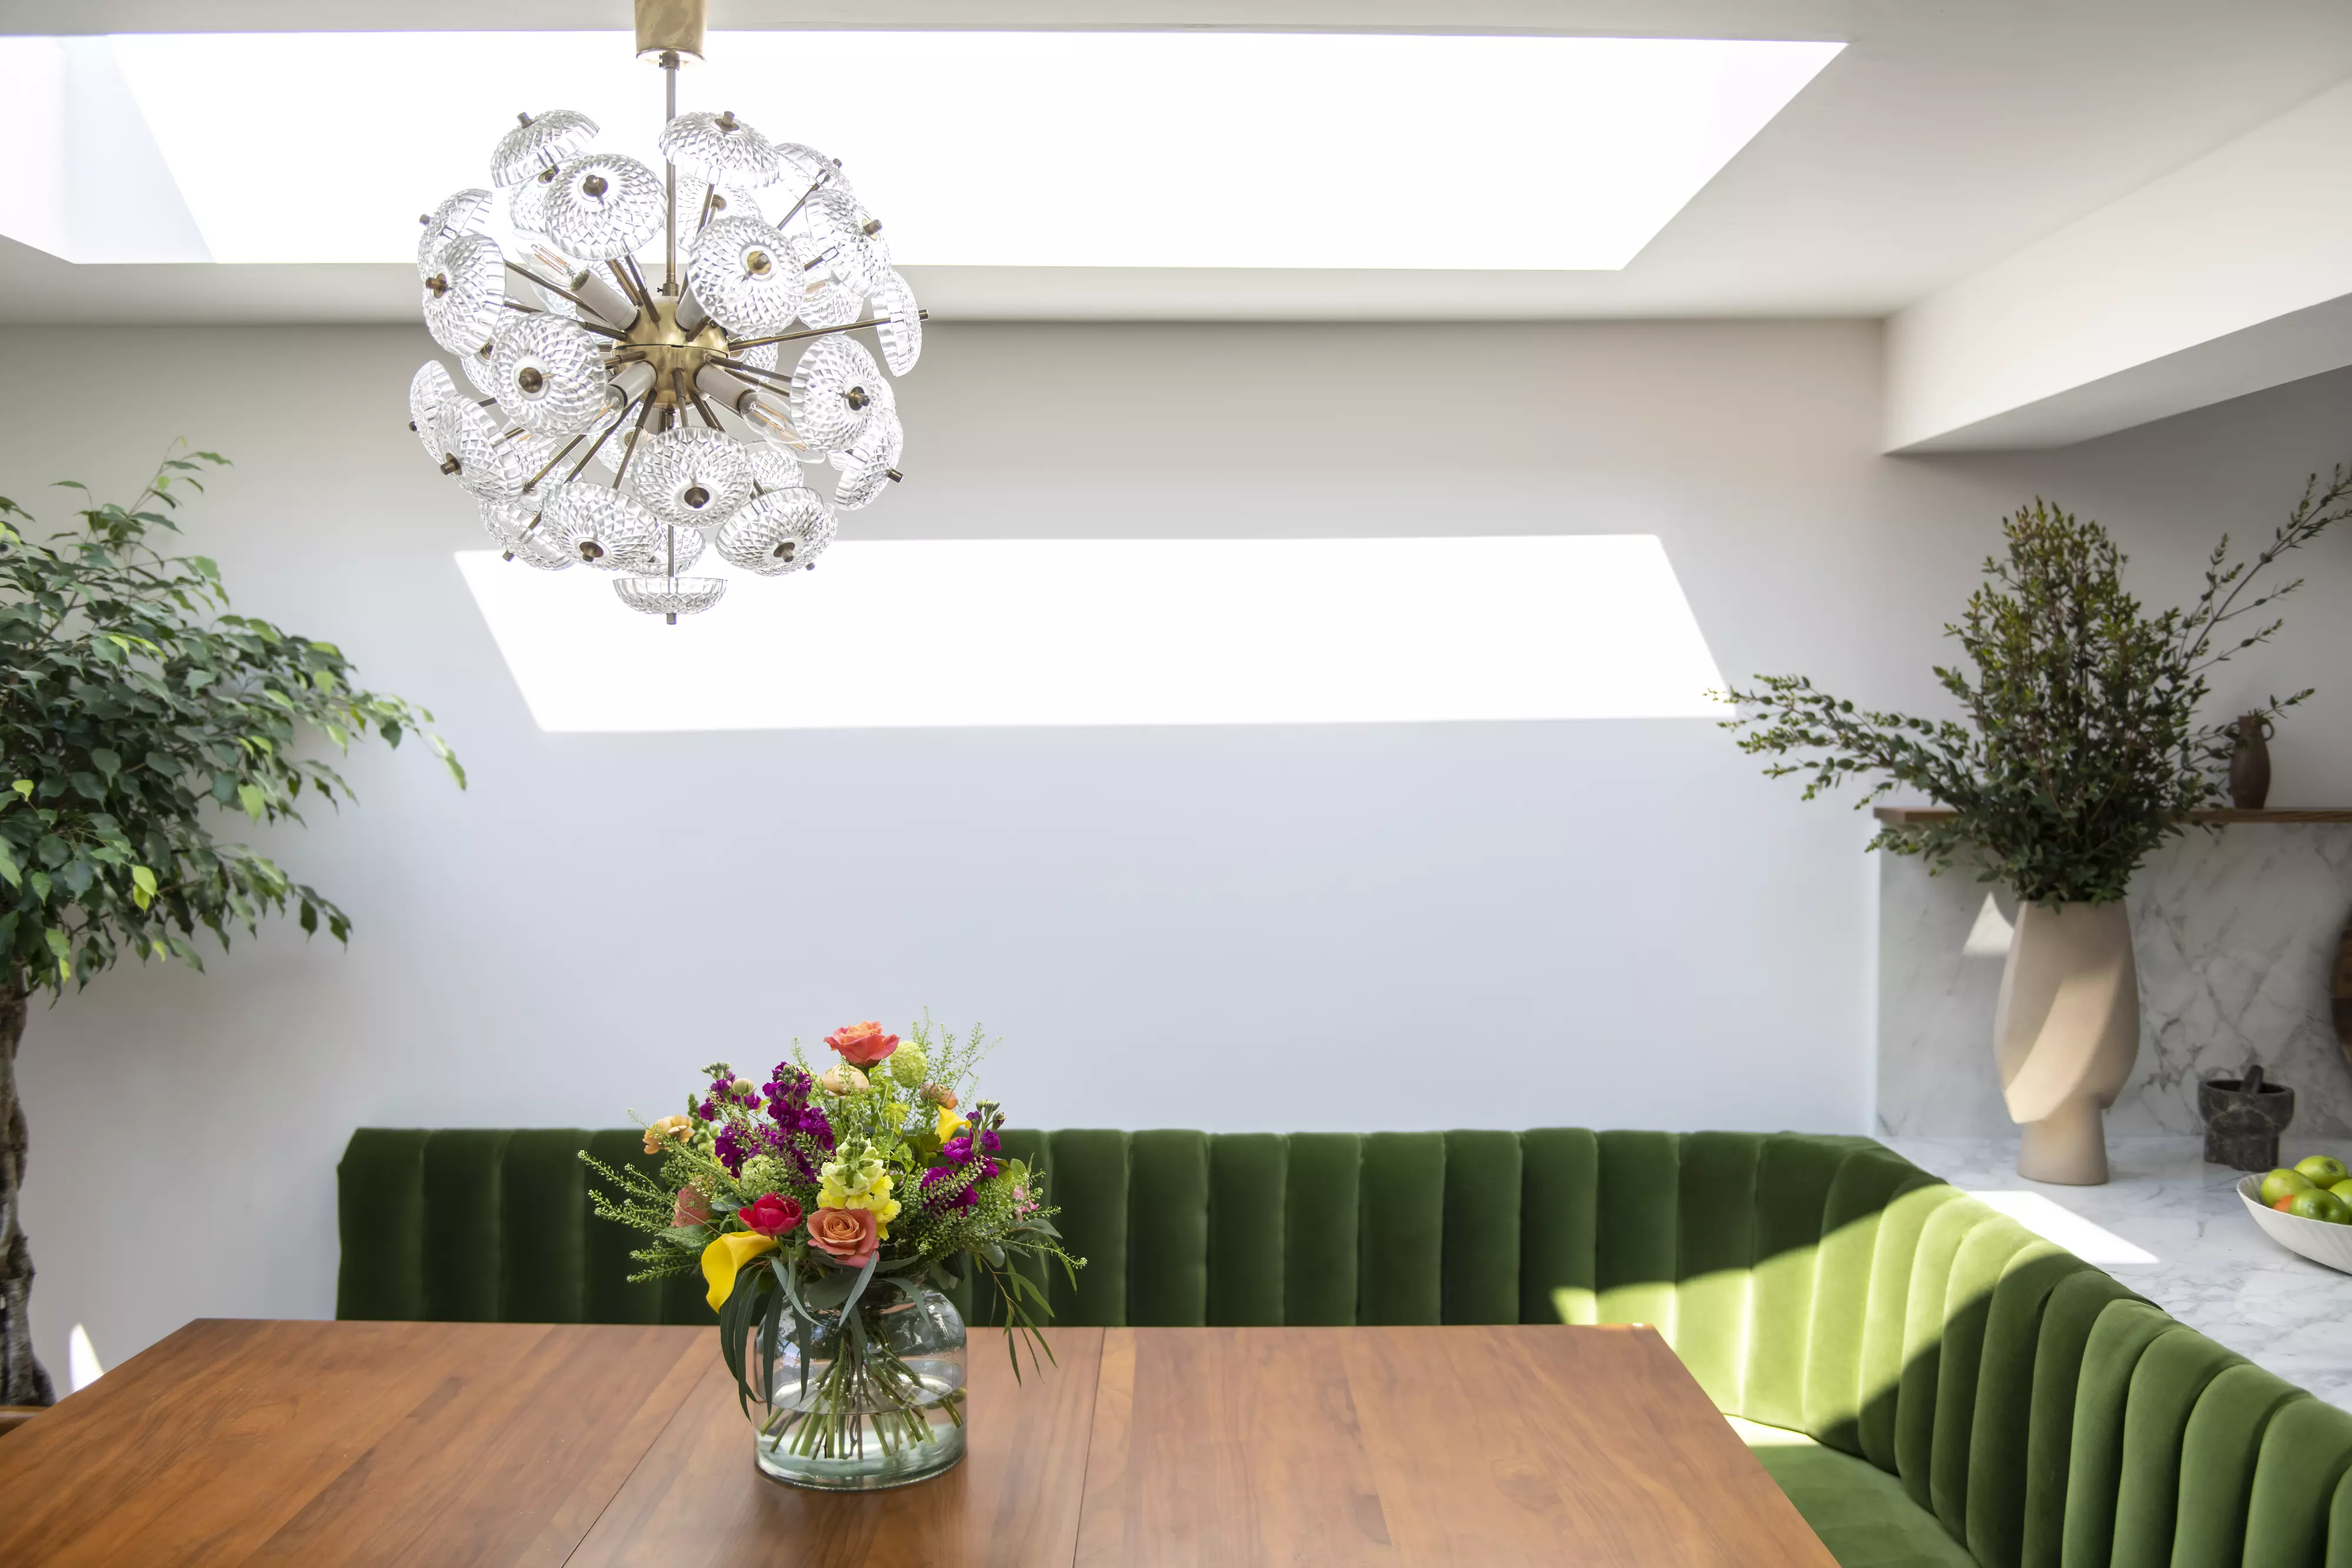 Chic dining room with VELUX windows, green banquette, and a chandelier.